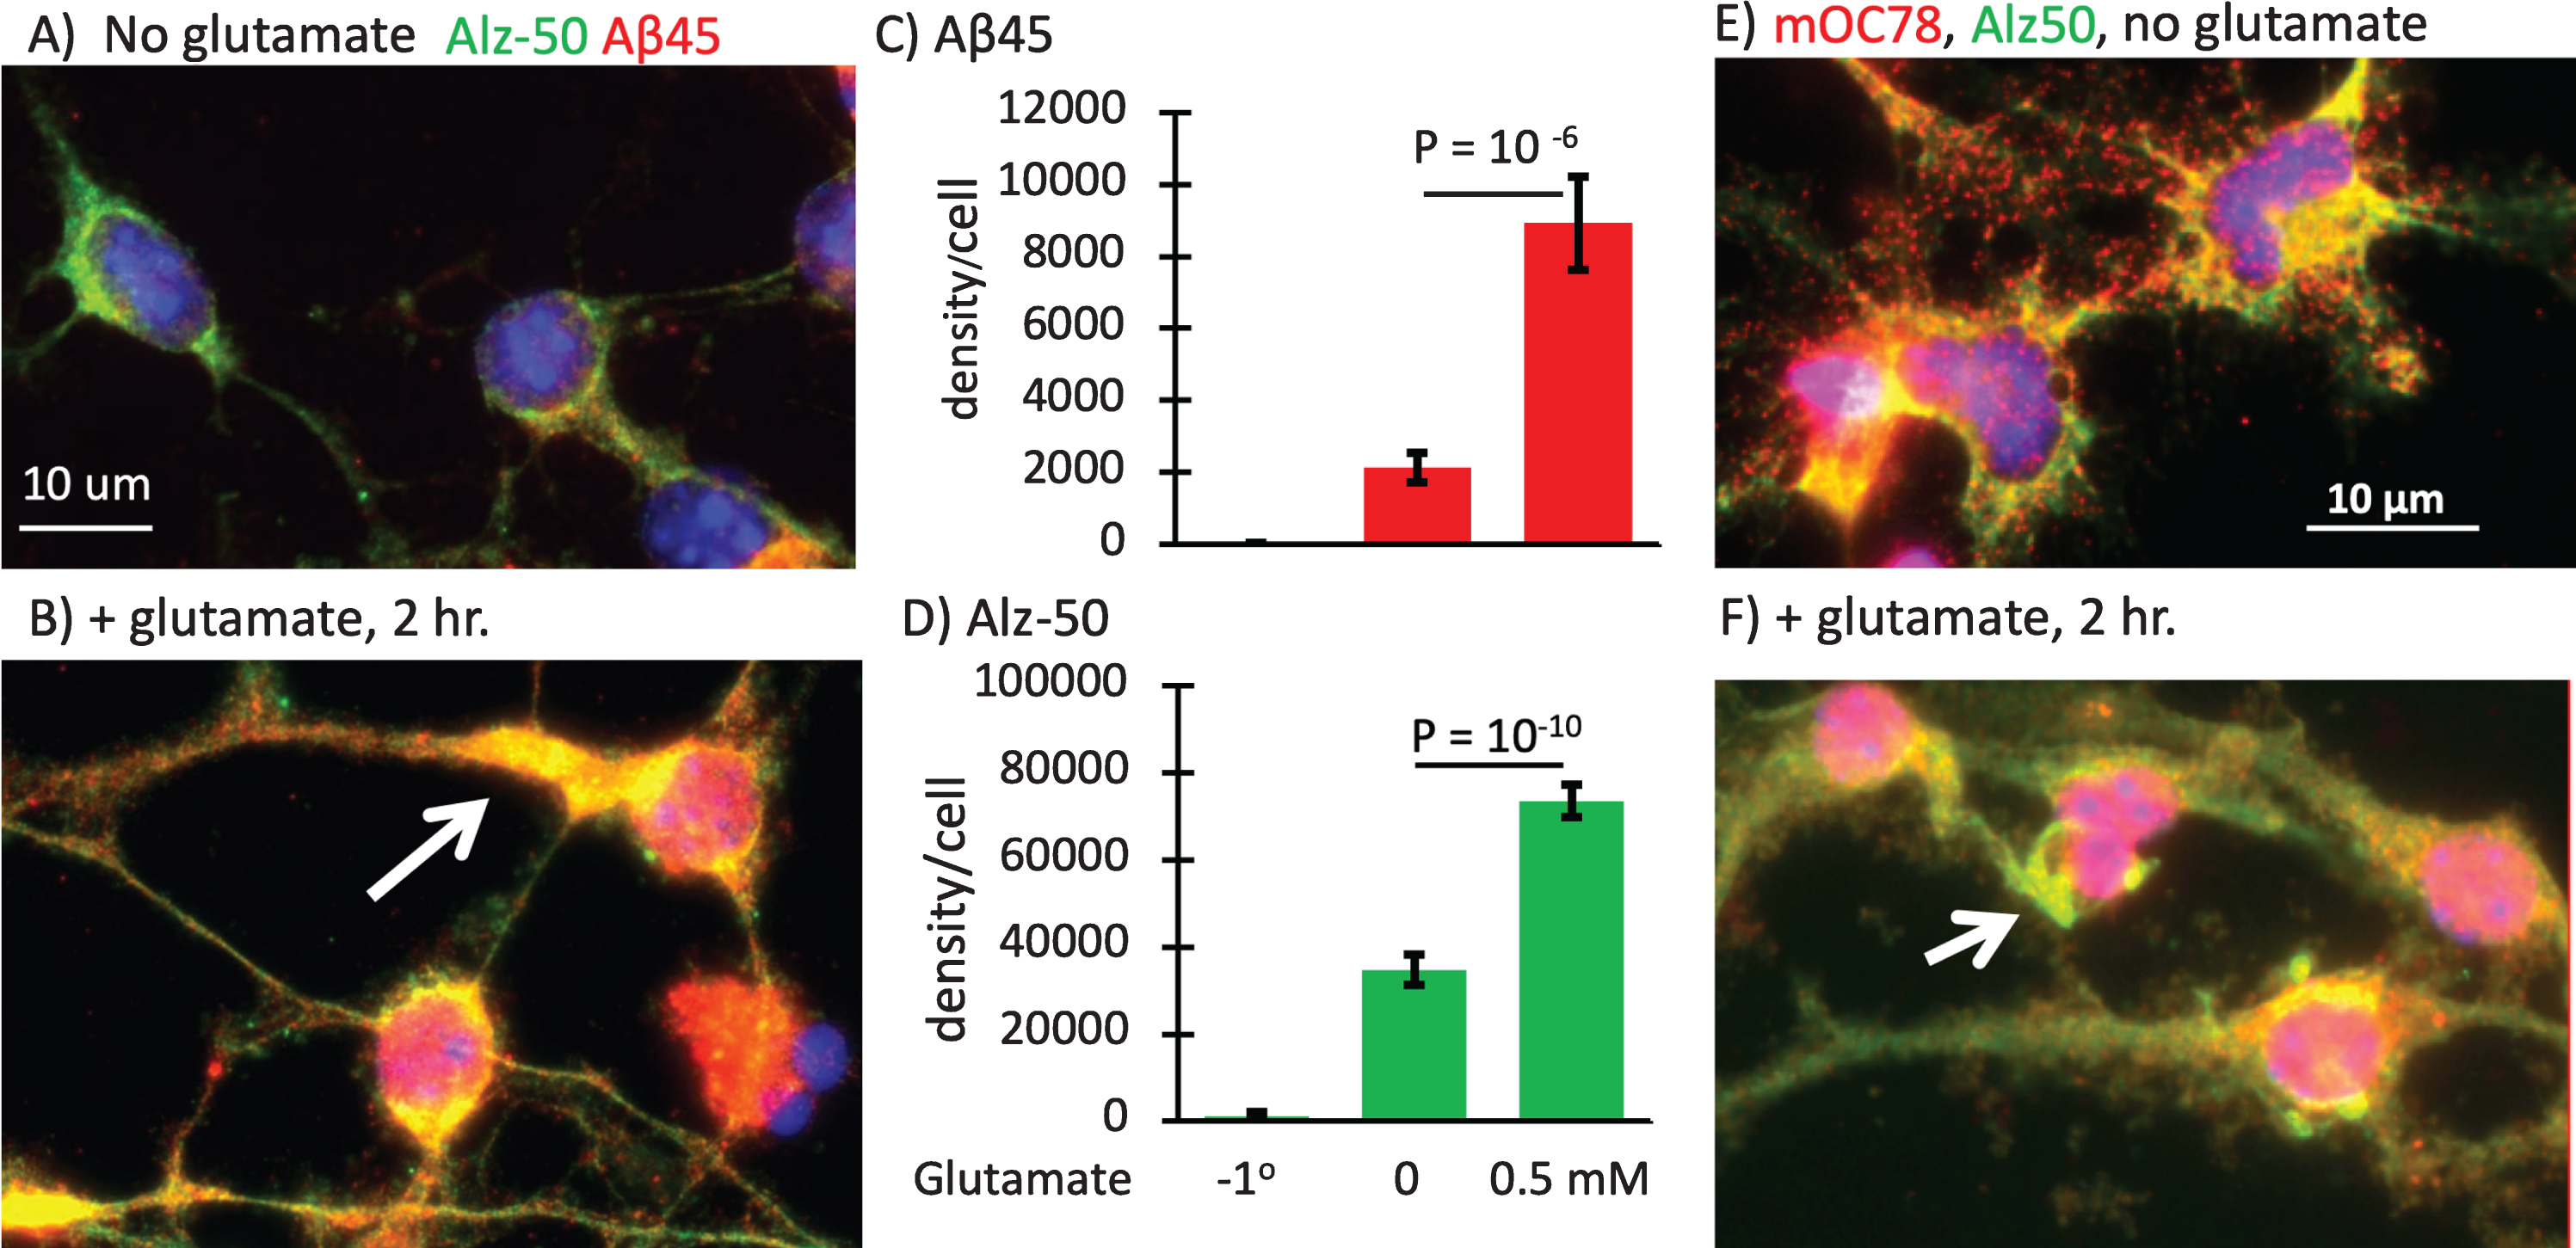 Large increase in Aβ45 and Alz-50 with glutamate with relocalization of Alz-50 tau to dendrites. A) Alz-50 tau in axons and soma (green) with low Aβ45 puncta (red) B) increases with 2 h treatment with 0.5 mM glutamate and moves to dendrites (arrow), with colocalization to anti-Aβ45 puncta in 23-month-old male 3xTg-AD neurons. C) 4-fold increase in Aβ45 with glutamate exceeds D) 2-fold increase in Alz-50. N = 17–35 cells. File 170406. E) 10-month-old female neurons rescaled to show individual mOC78 objects and overlap with Alz-50. F) Increase in mOC78 with glutamate treatment and large objects resembling neurofibrillary tangles (arrow). 10-month-old female 3xTg-AD neurons. File 170726.